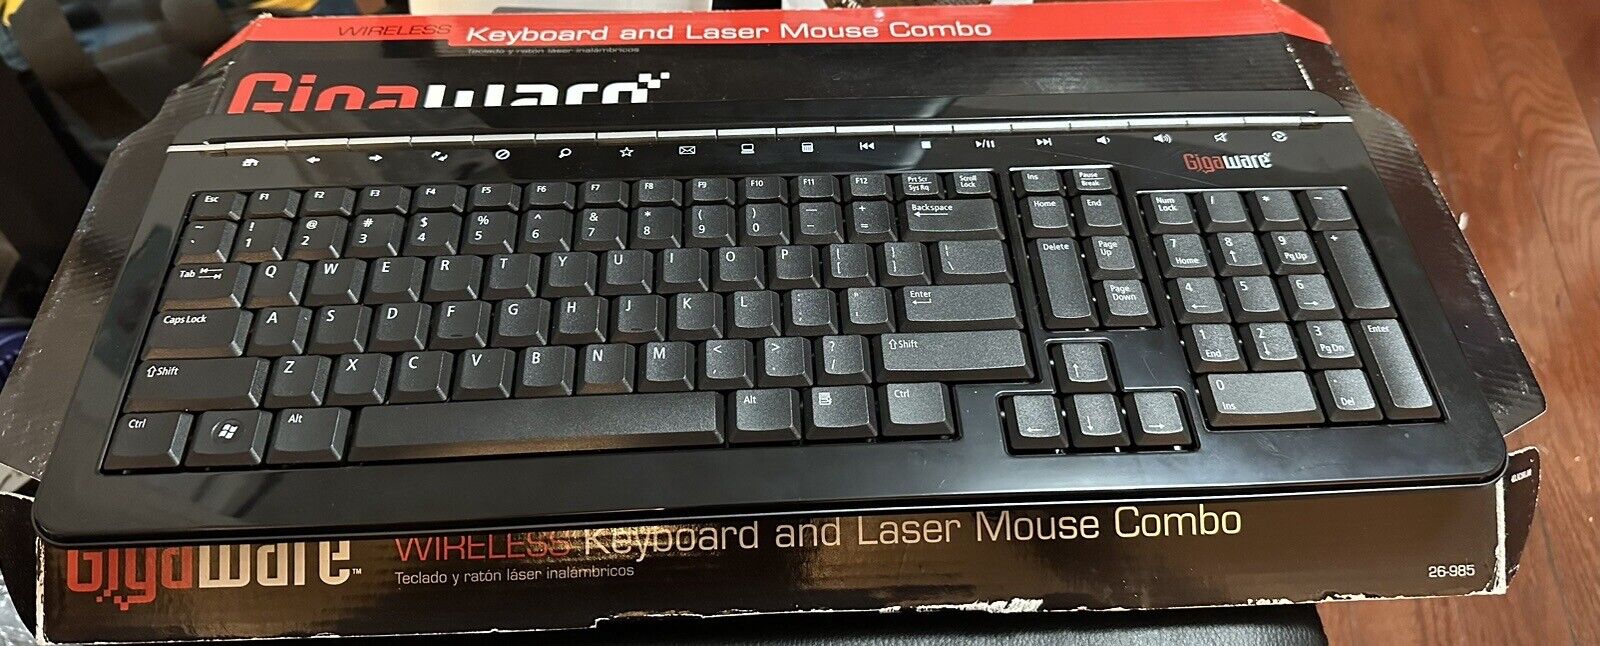 Gigaware 26-985 Wireless Keyboard COMPUTER ACCESSORY  With Box And Driver Cd